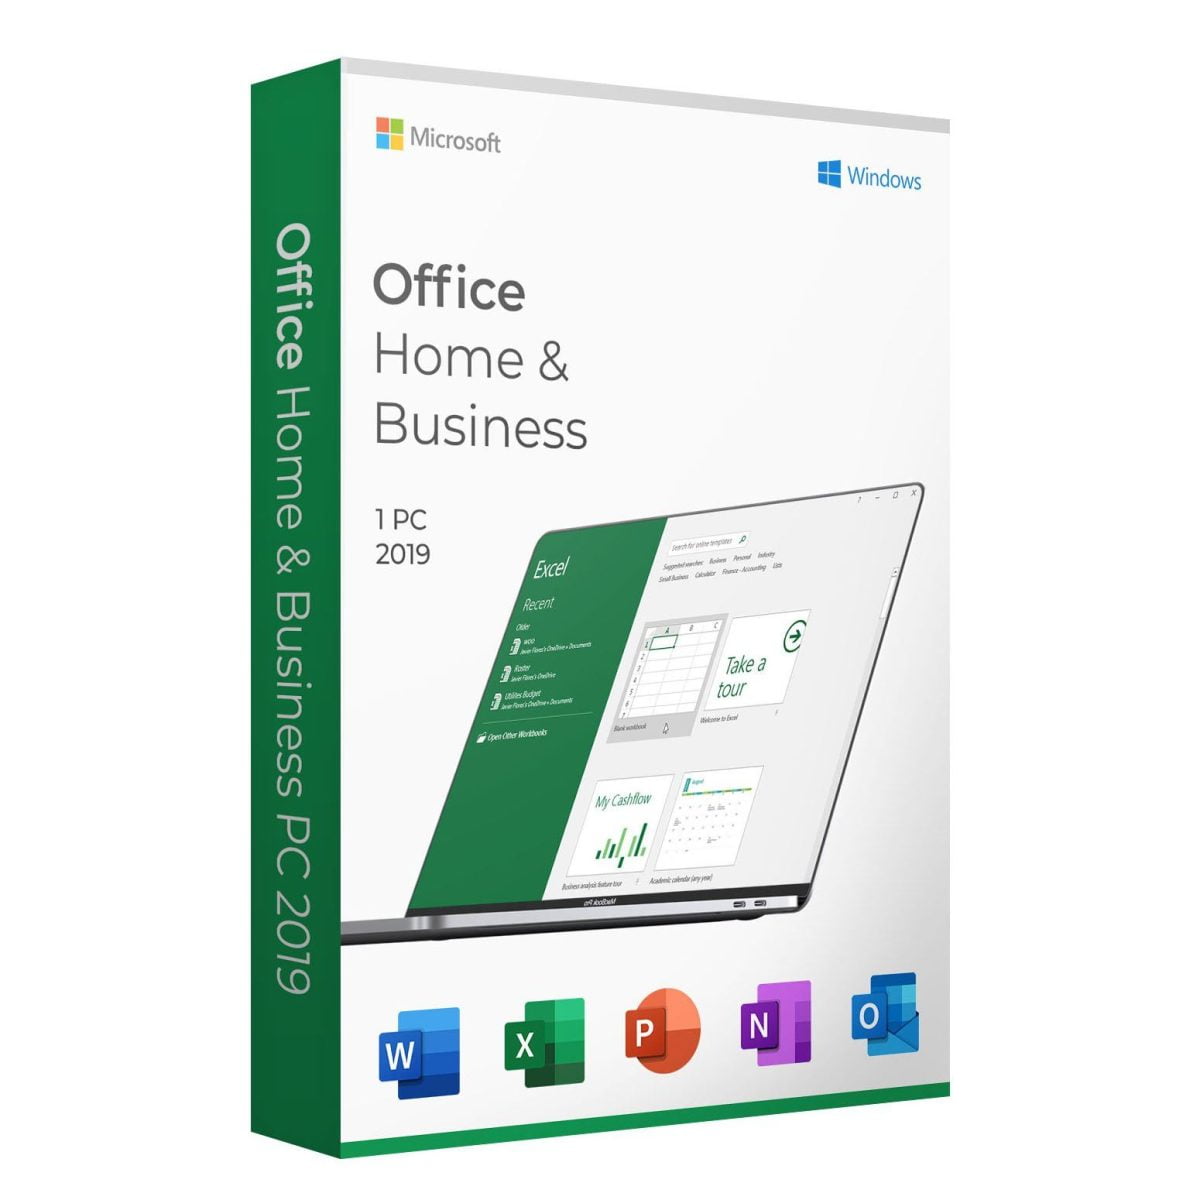 Microsoft Office 2019 Home and Business for Windows PC